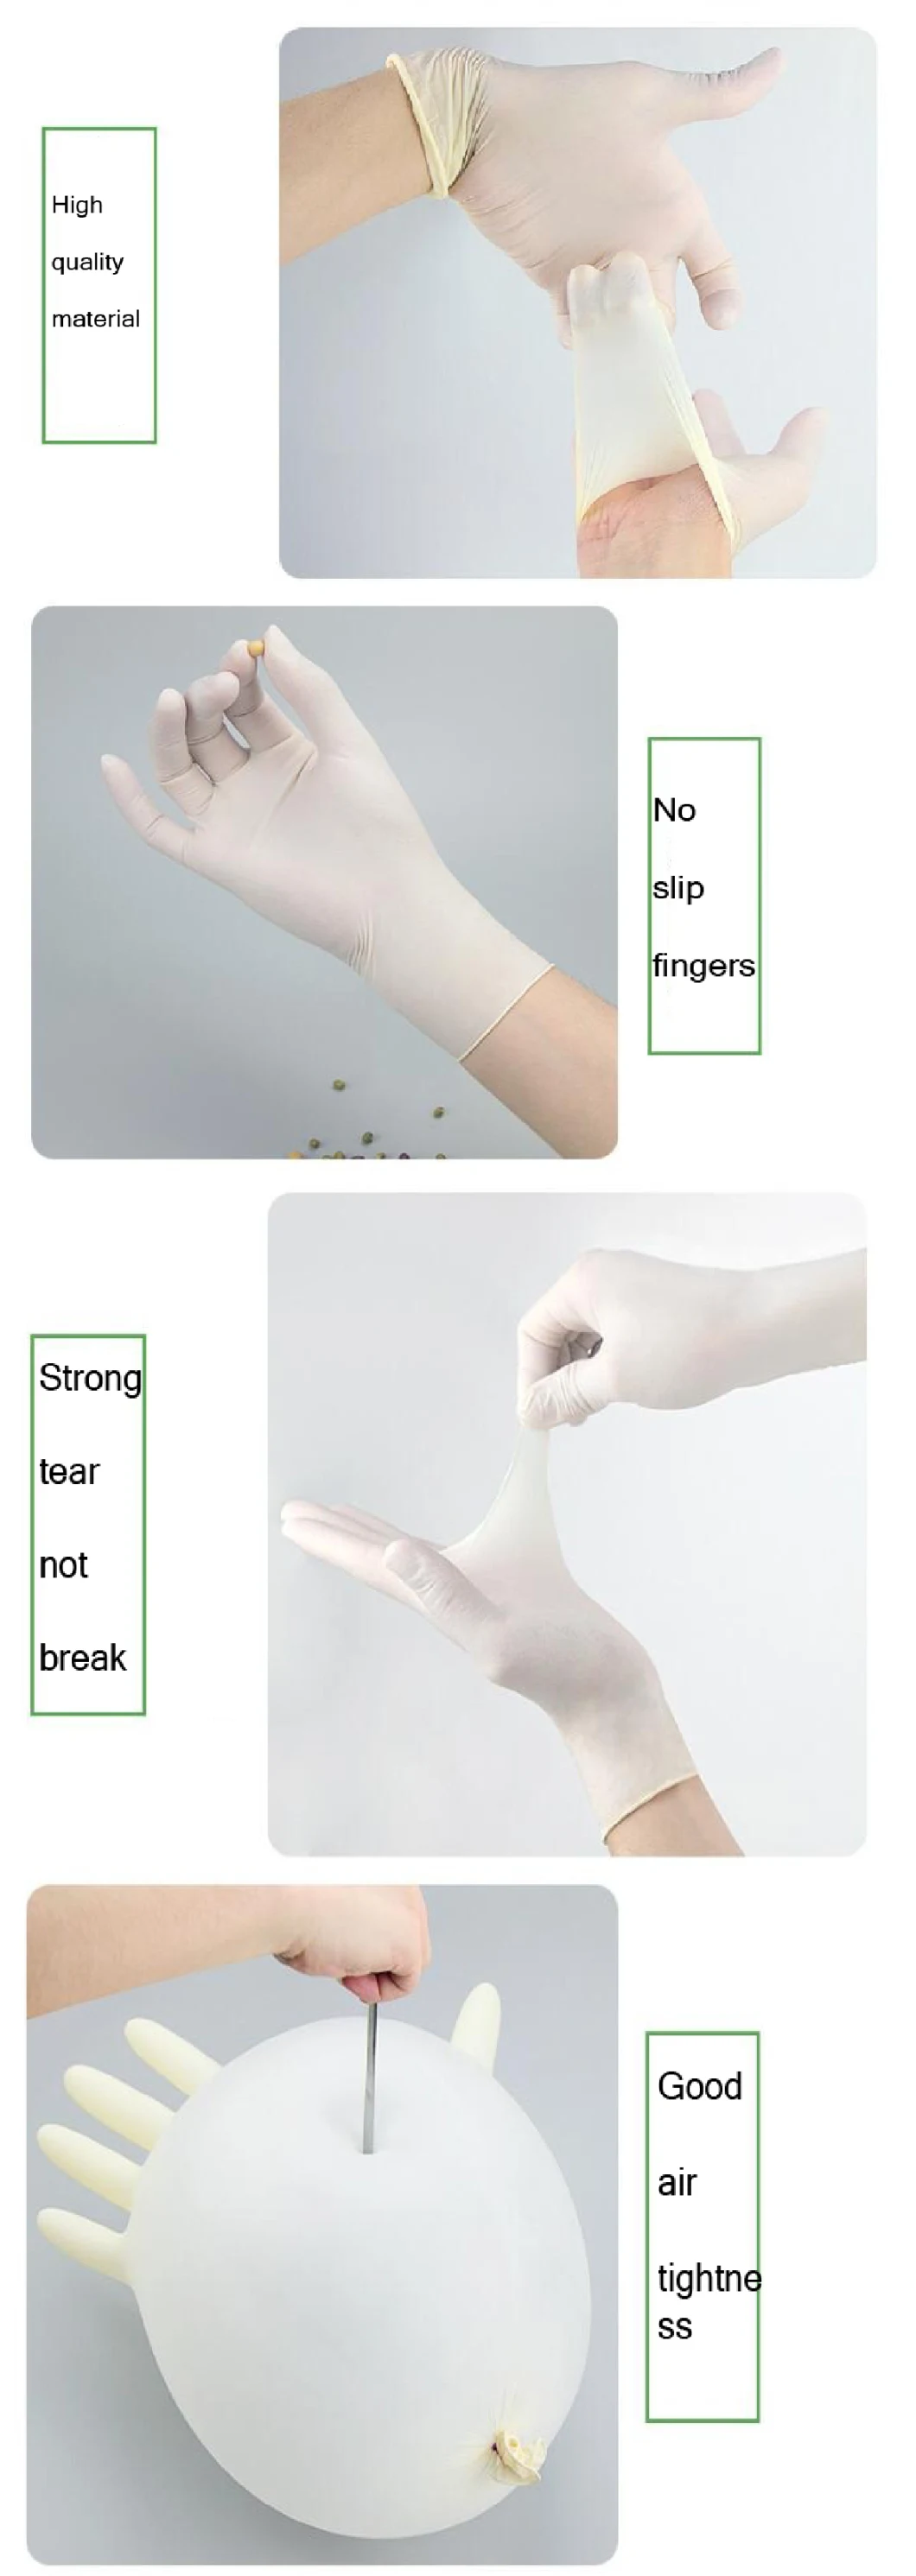 Latex Examination Gloves/Disposable Latex Gloves Consumables Disposable Latex Surgical Glove of Surgical Equipments Medical Gloves